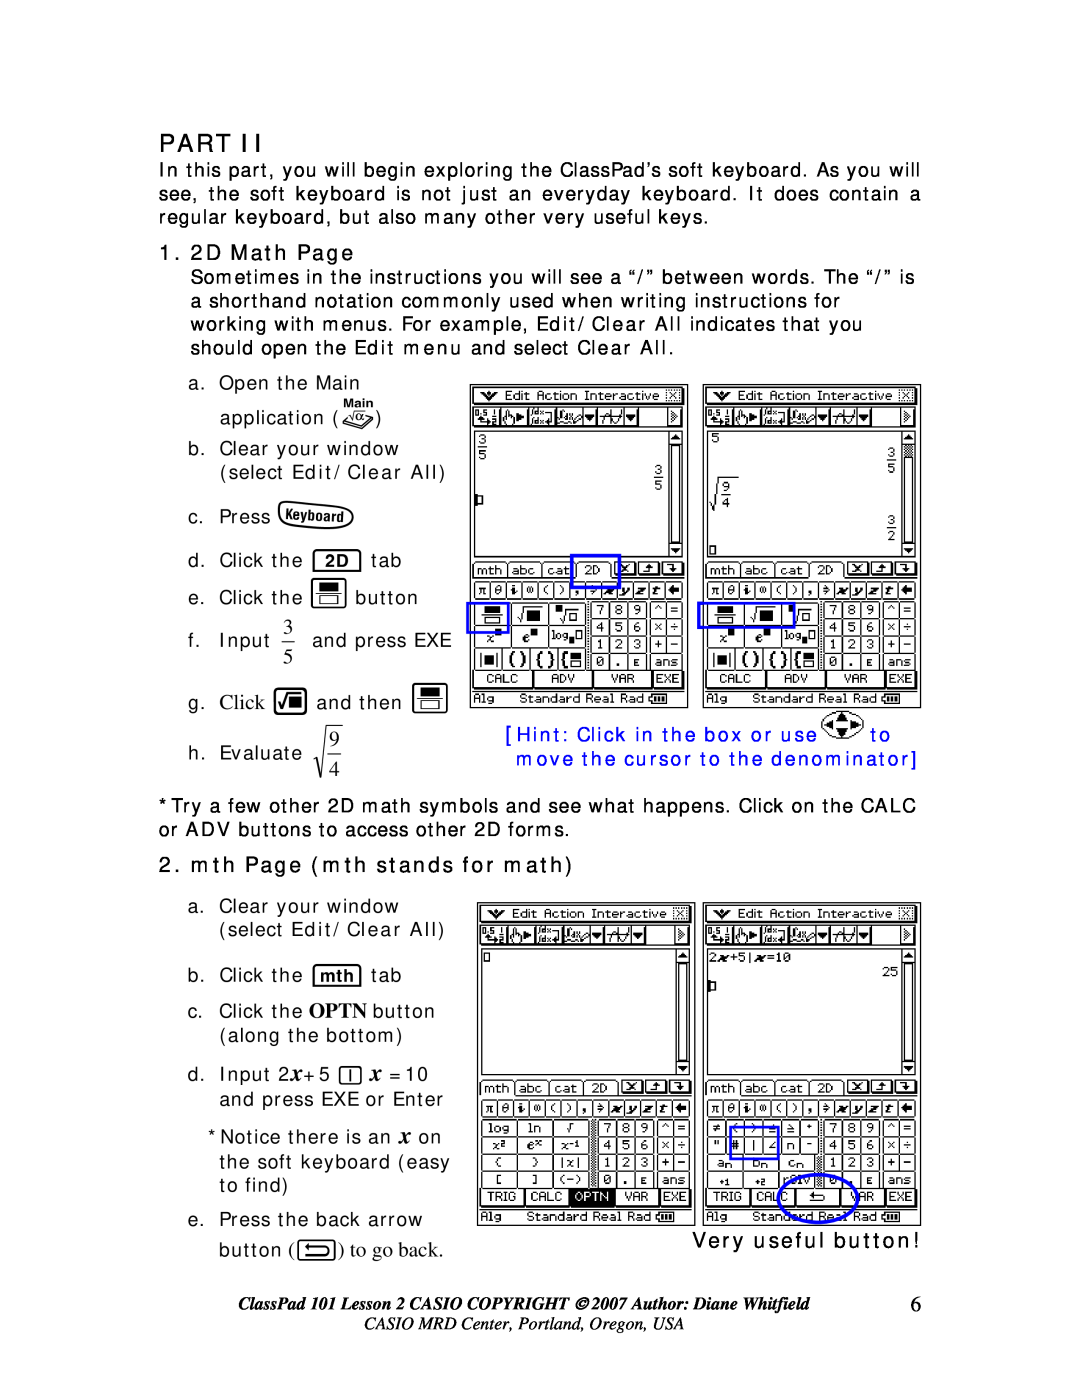 AB Soft 101 manual 1. 2D Math Page, mth Page mth stands for math, Very useful button, button I to go back, Part 